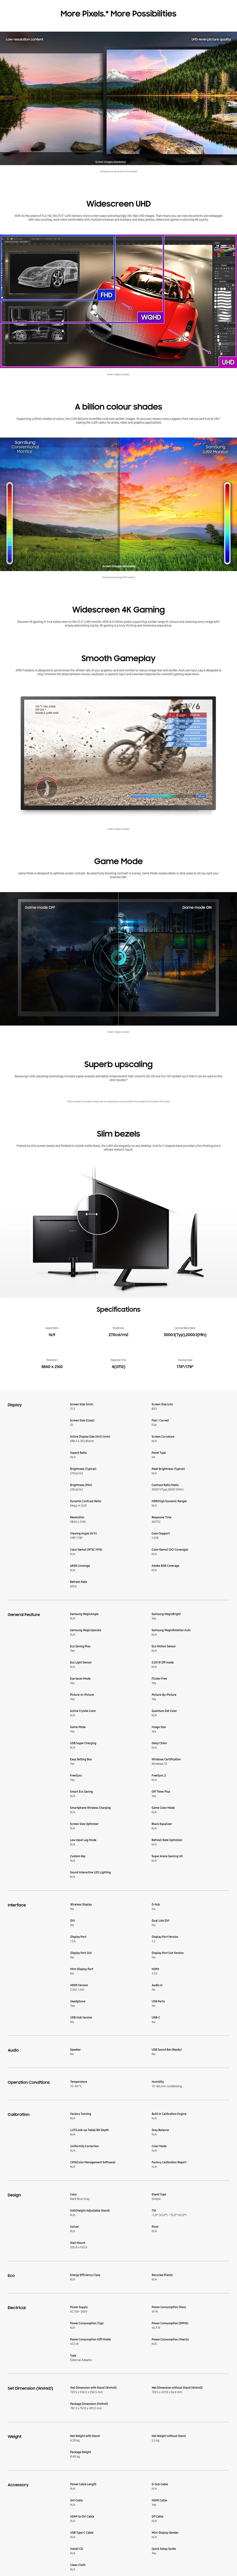 A large marketing image providing additional information about the product Samsung UJ590 31.5" UHD 60Hz MVA Monitor - Additional alt info not provided